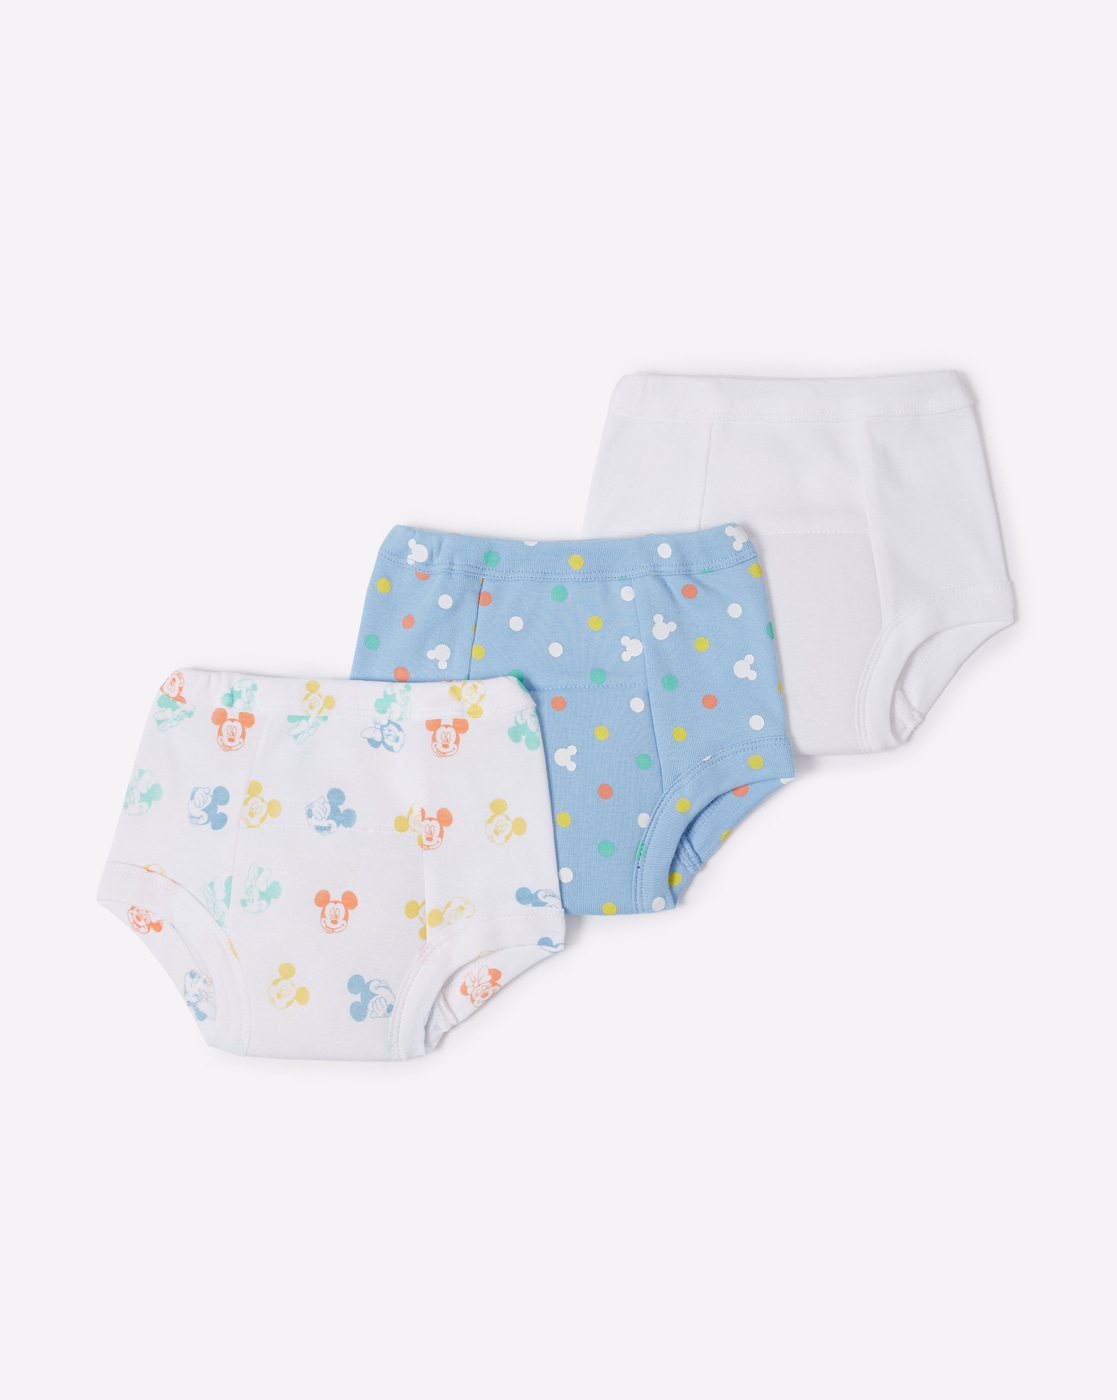 Bembika Baby Potty Training Pants Cotton Potty Training Pants For Babies  Waterproof Breathable Padded Underwear for